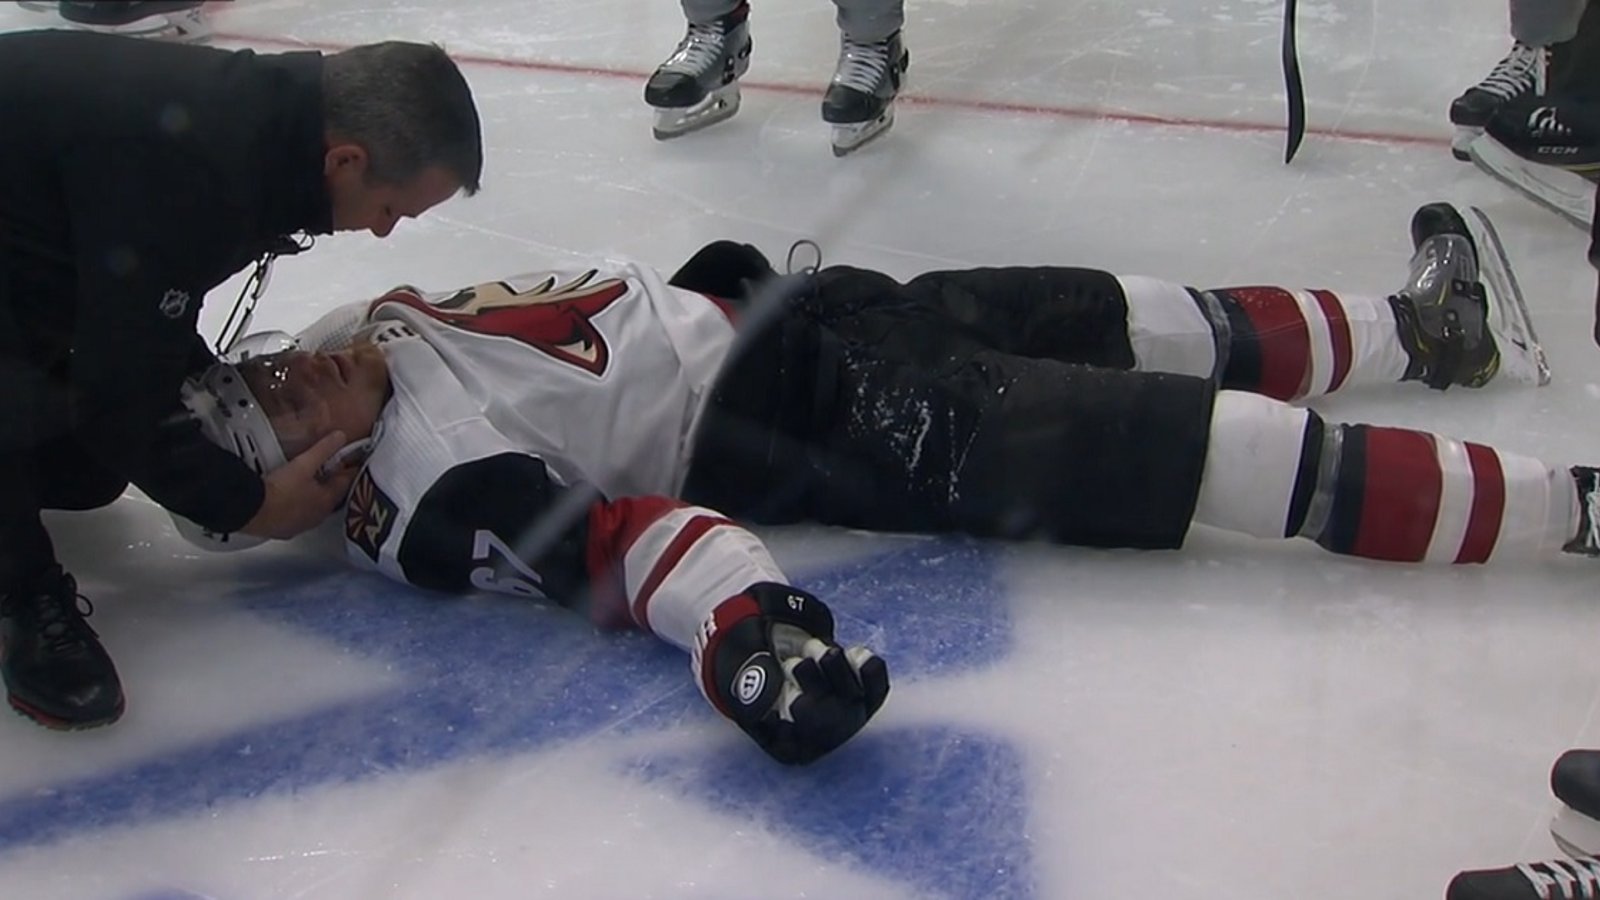 Lawson Crouse in bad shape after going head first into the boards.